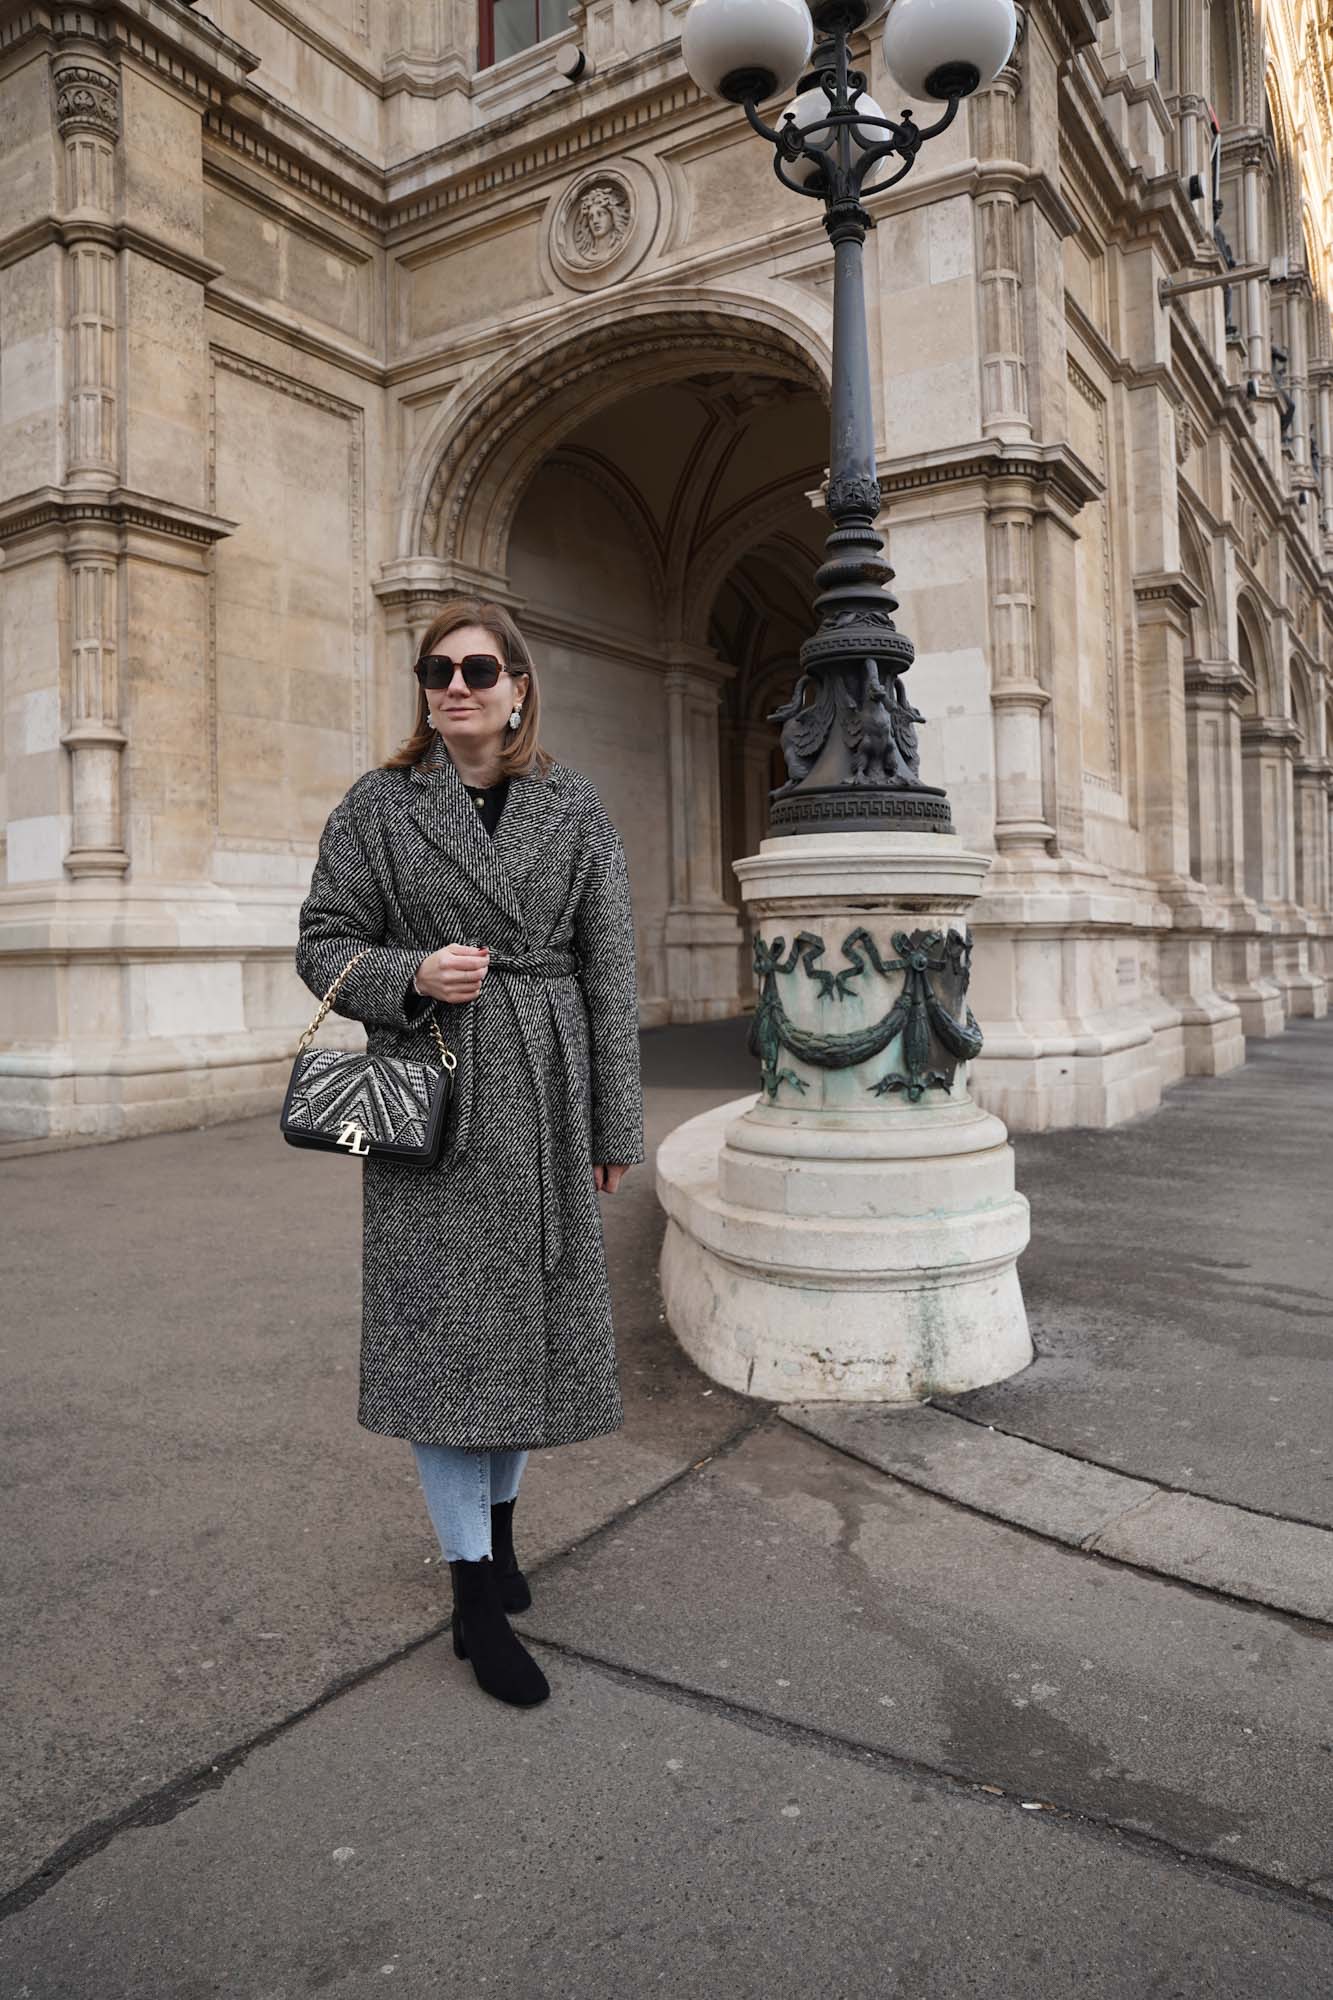 Winter coat, jeans, black boots, Stiefeletten, casual, outfit winter Vienna city 